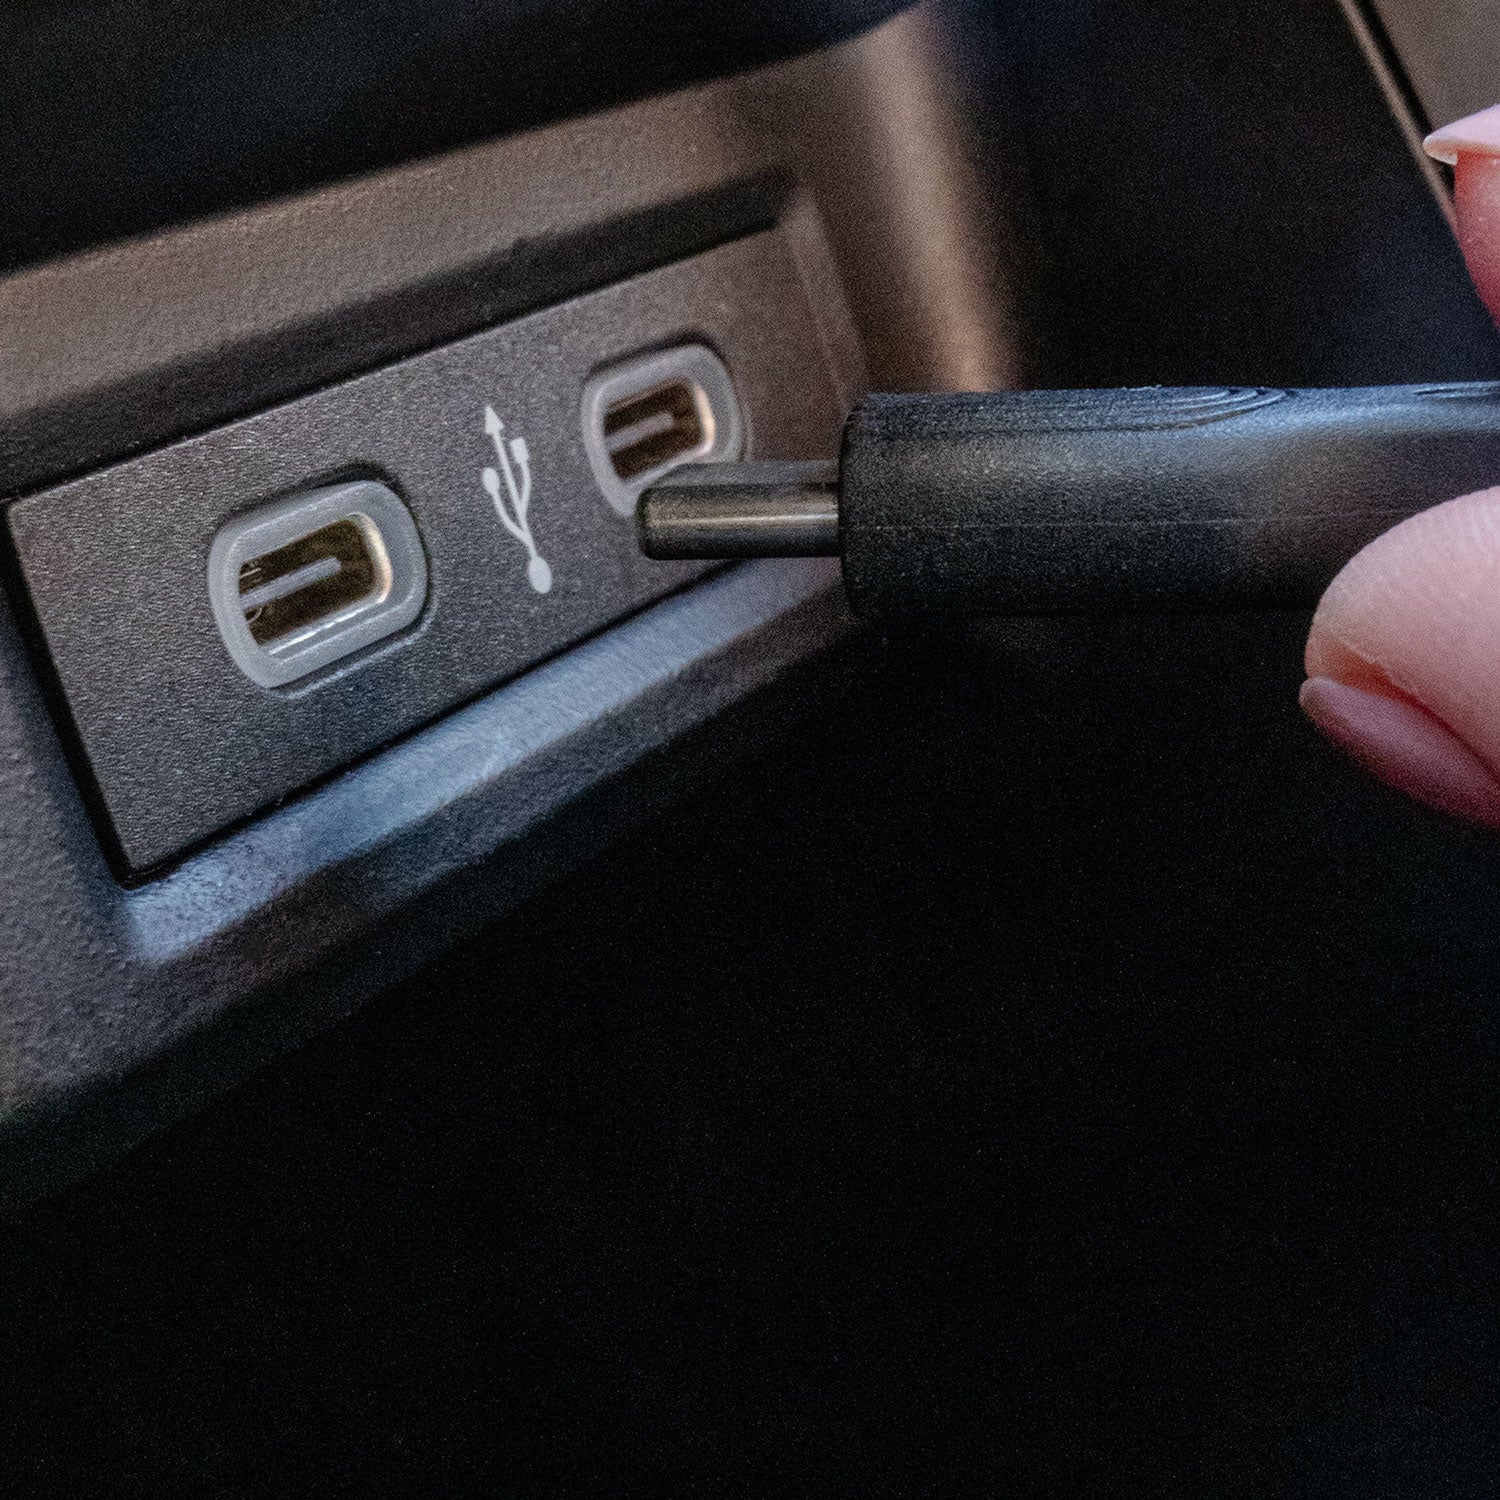 USB-C cable for car